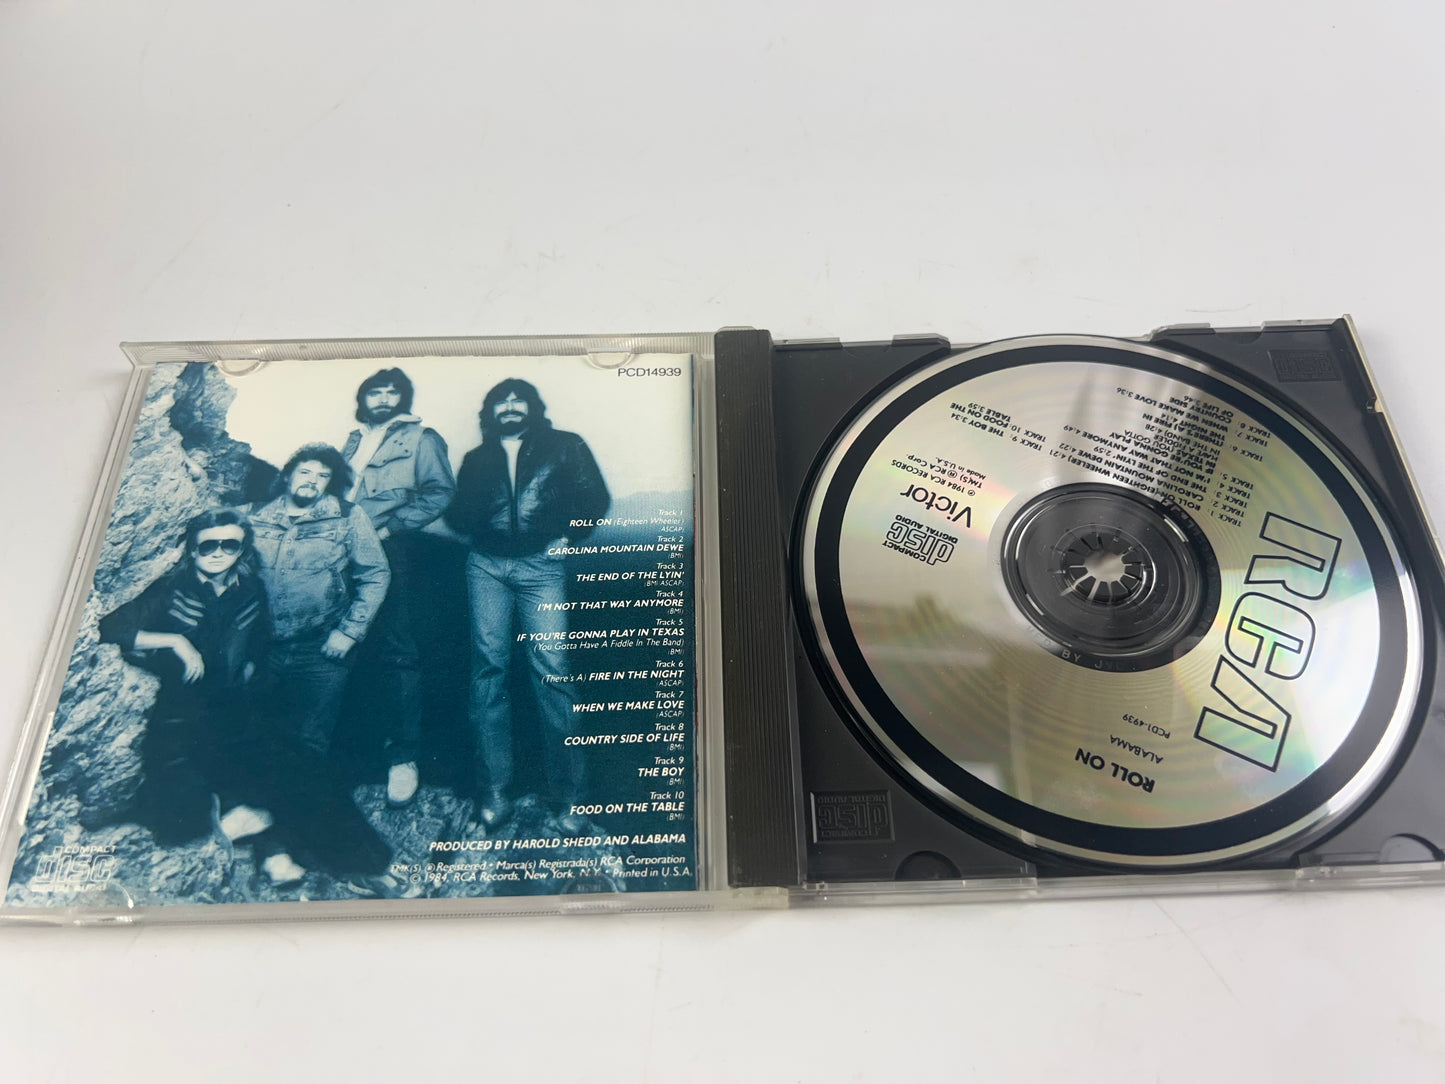 Roll On by Alabama (CD, Oct-1990, RCA)